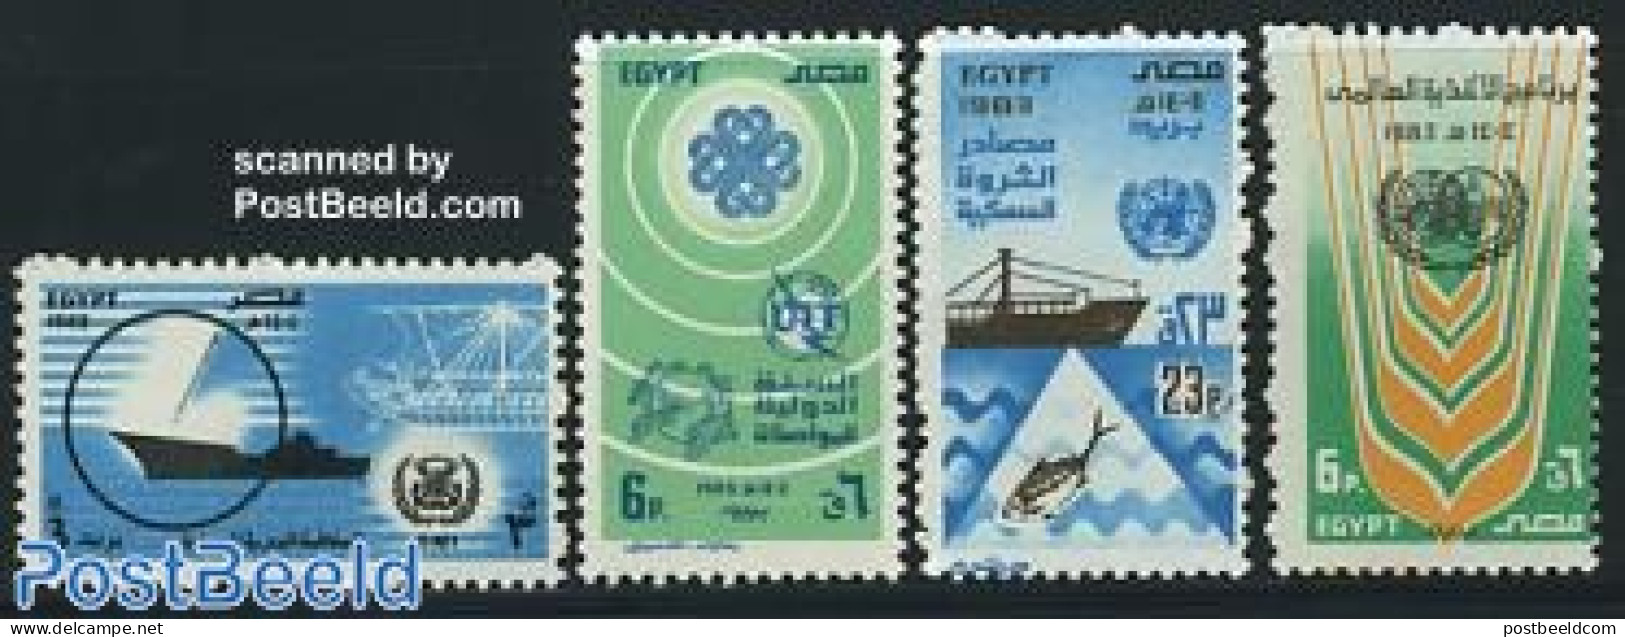 Egypt (Republic) 1983 Mixed Issue 4v, Mint NH, History - Science - Transport - United Nations - Telecommunication - Sh.. - Ungebraucht